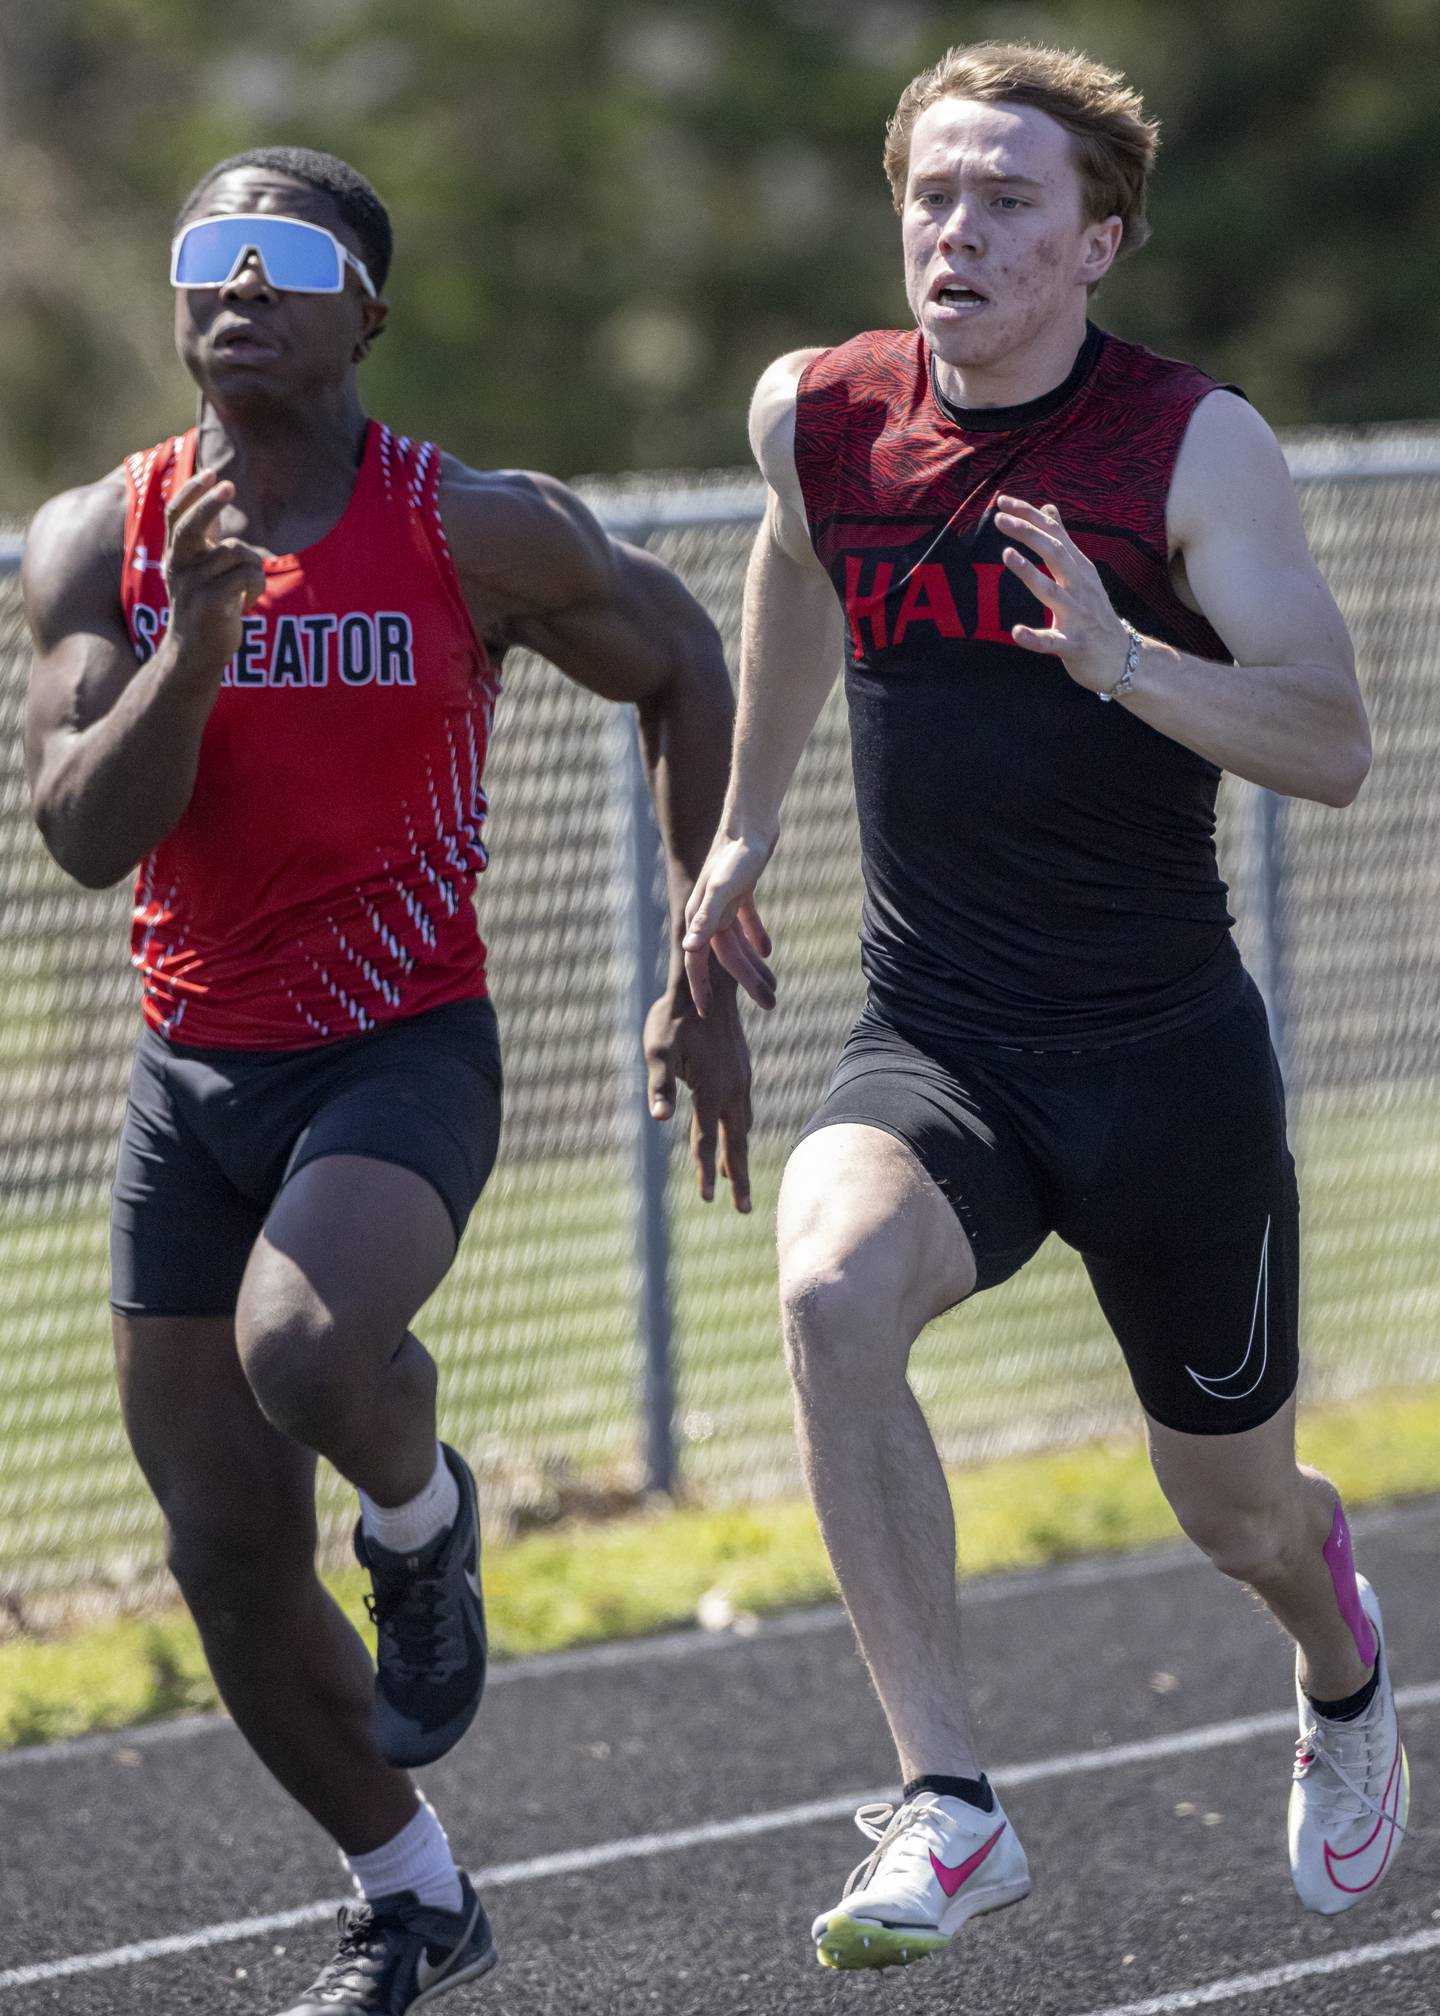 Caleb Bickett (Hall) battles it out with Jordan Lukes (Streator) in the men's 100 meter sprint during the Rollie Morris Invite at Hall High School on April 13, 2024. They both posted an 11.1 second time with Brown just edging out Bickett for the win.